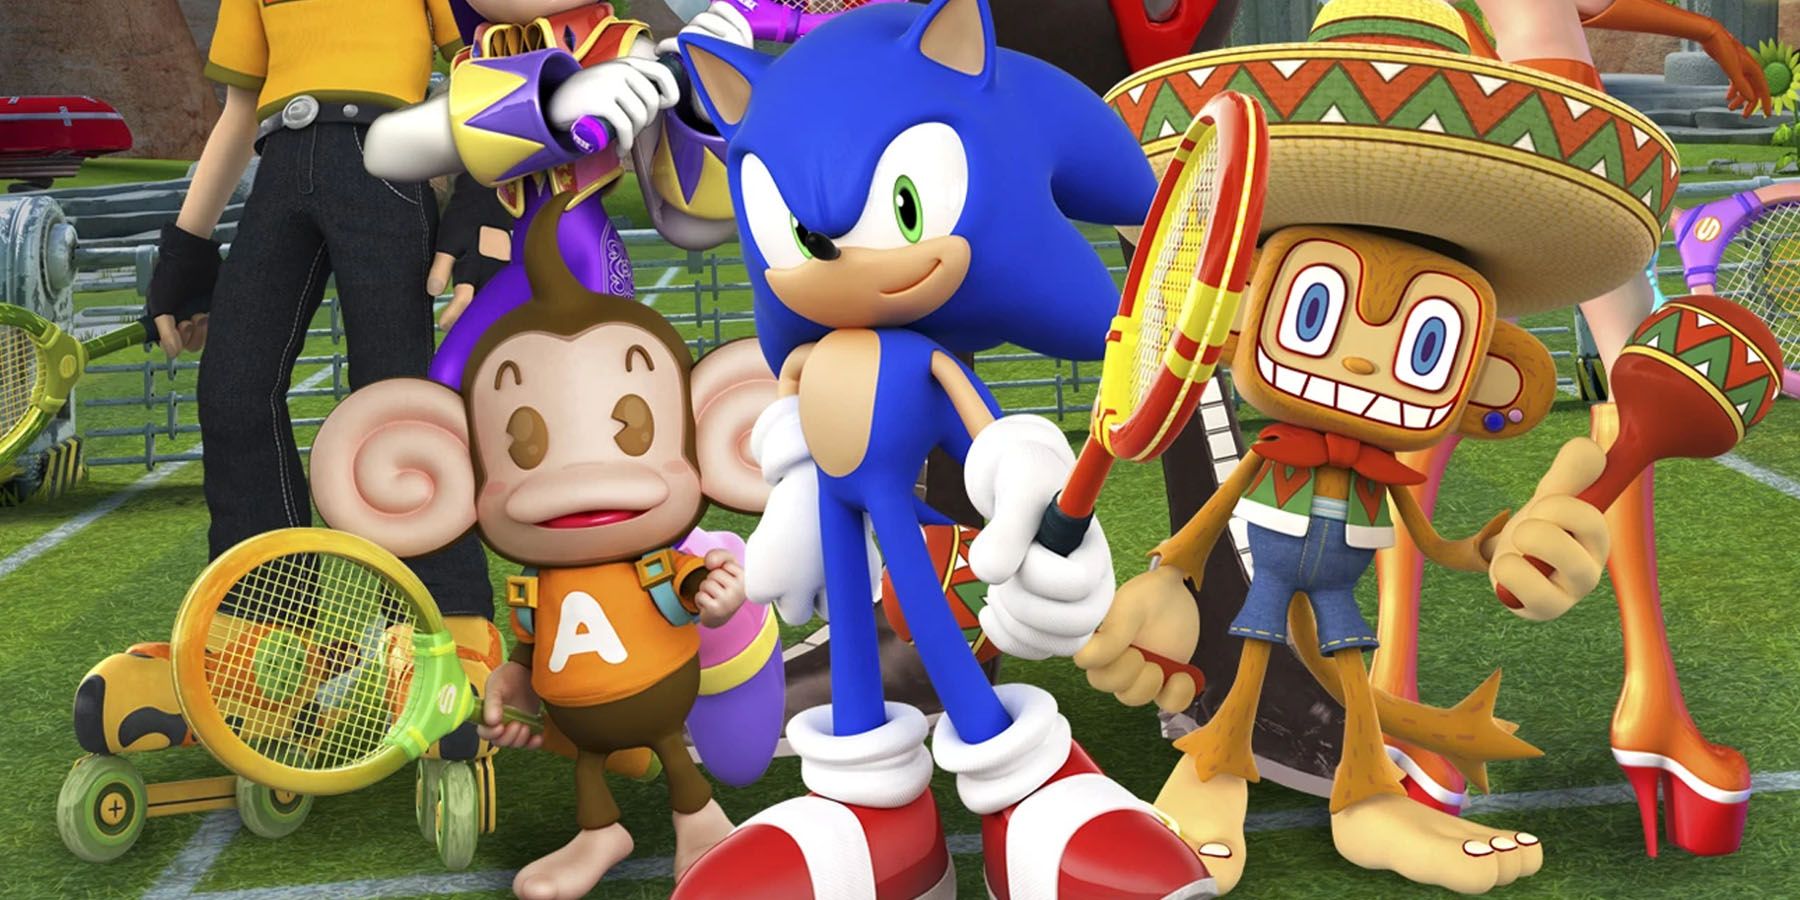 SEGA hosts its third annual Sonic Central fan event — GAMINGTREND